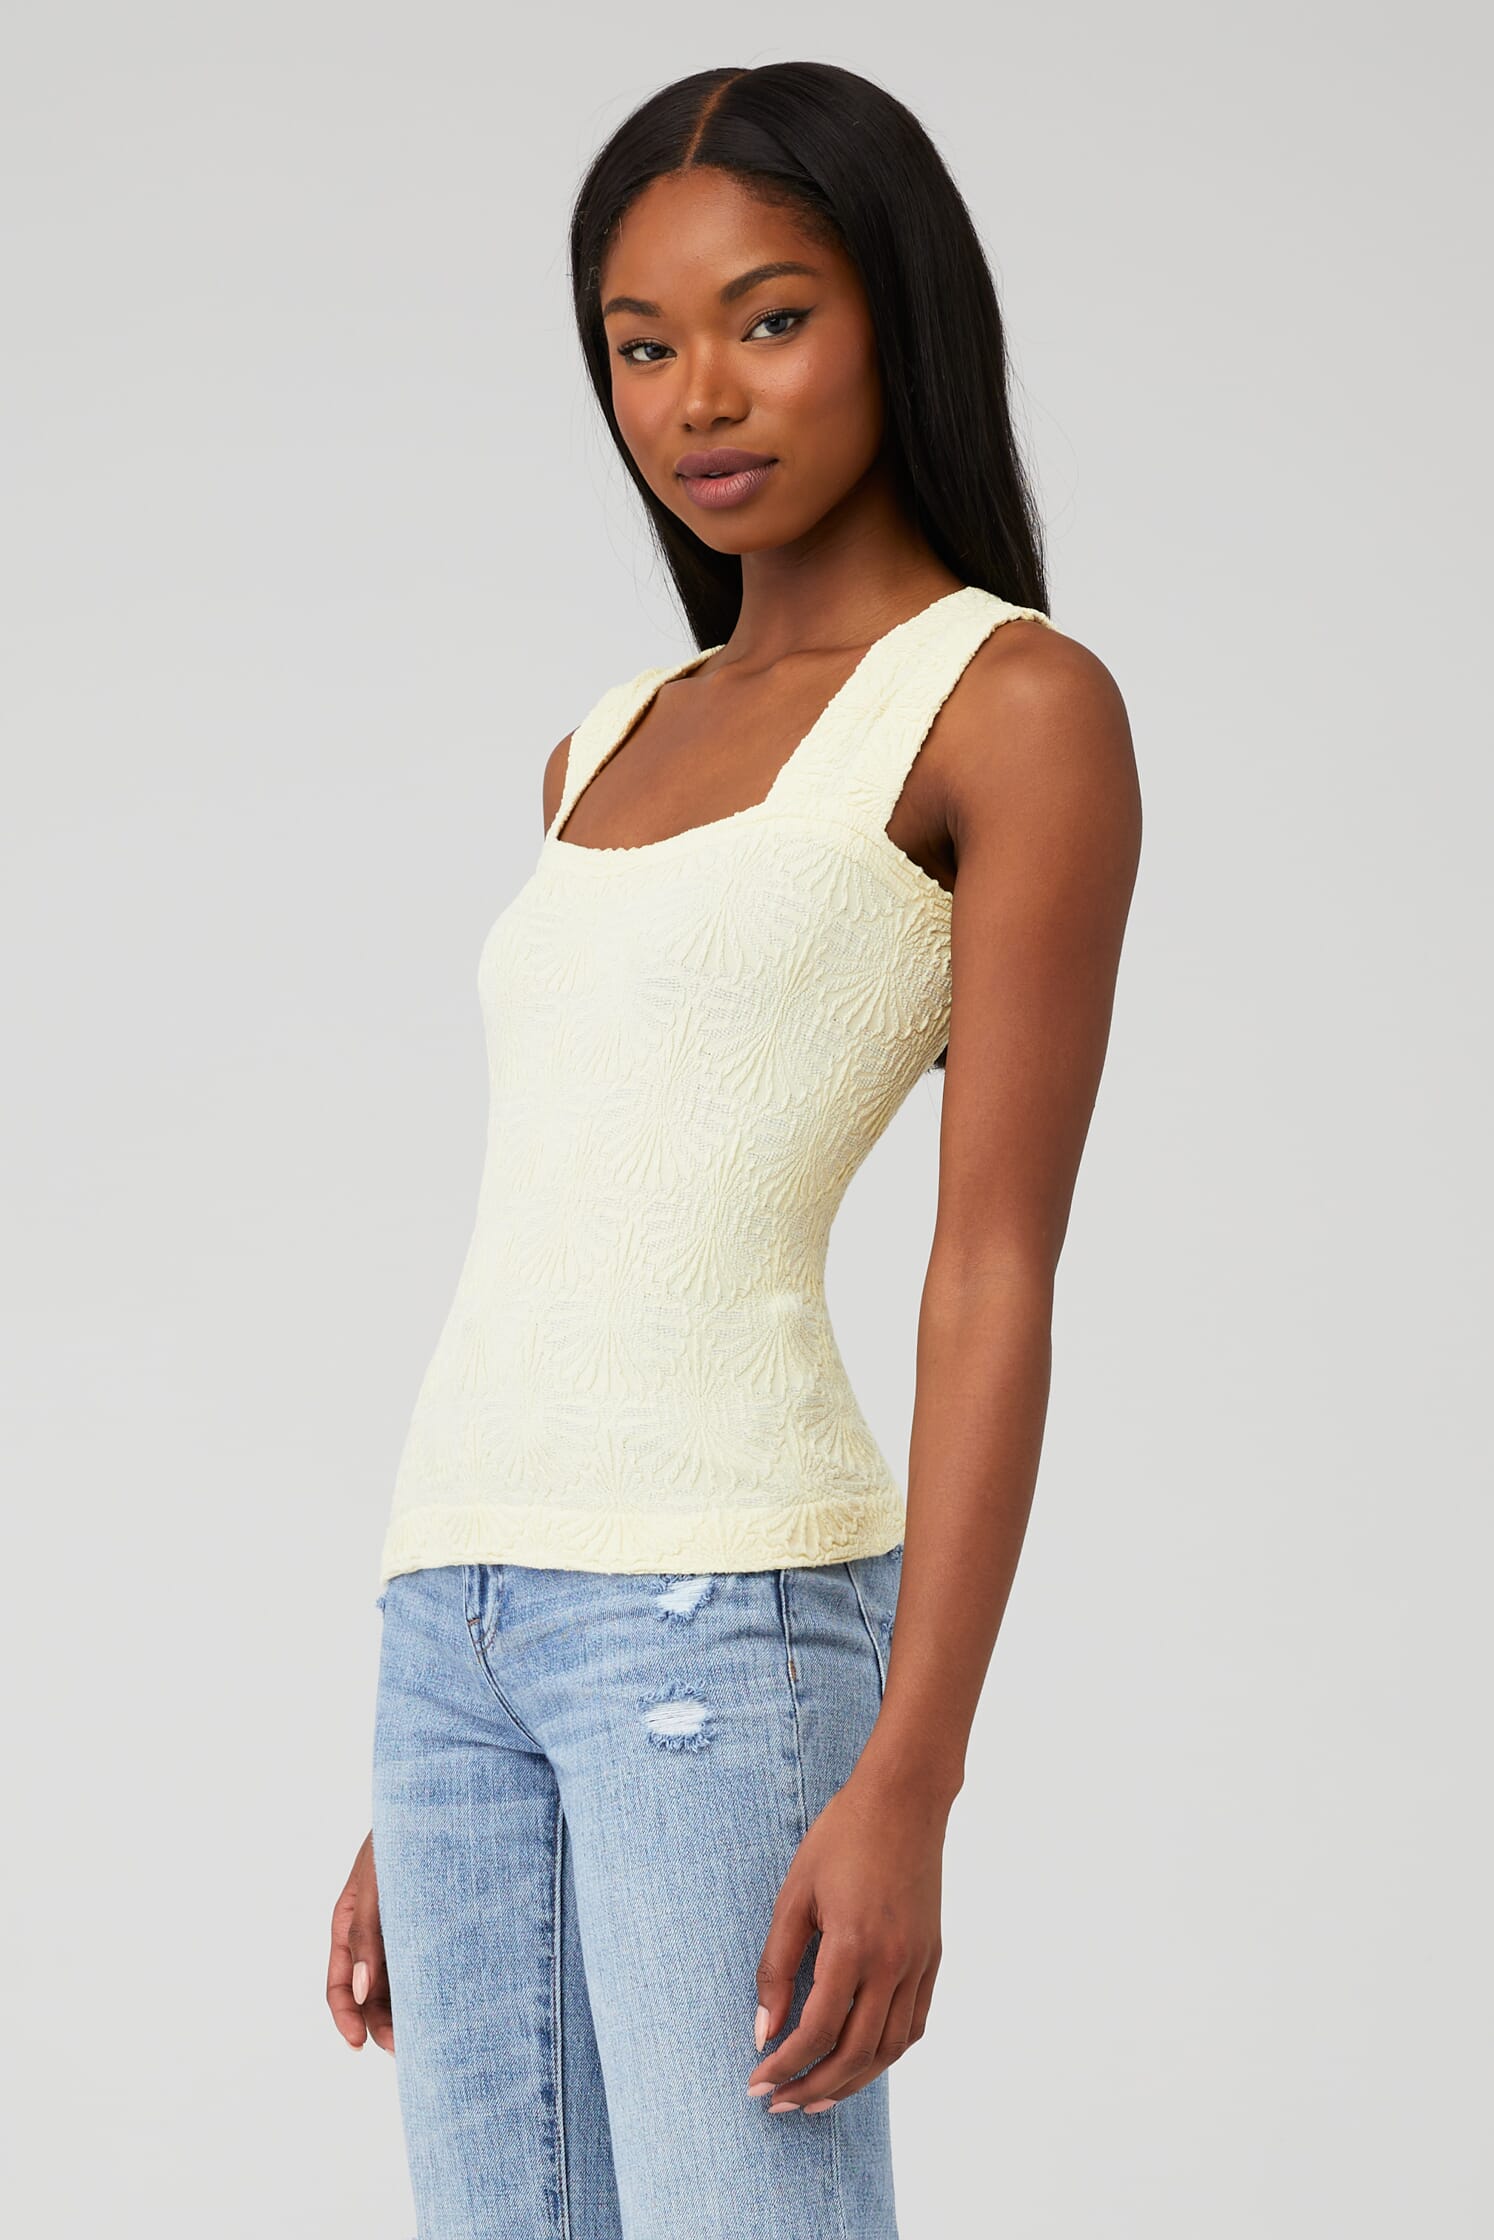 Free People, Clean Lines Cami in White